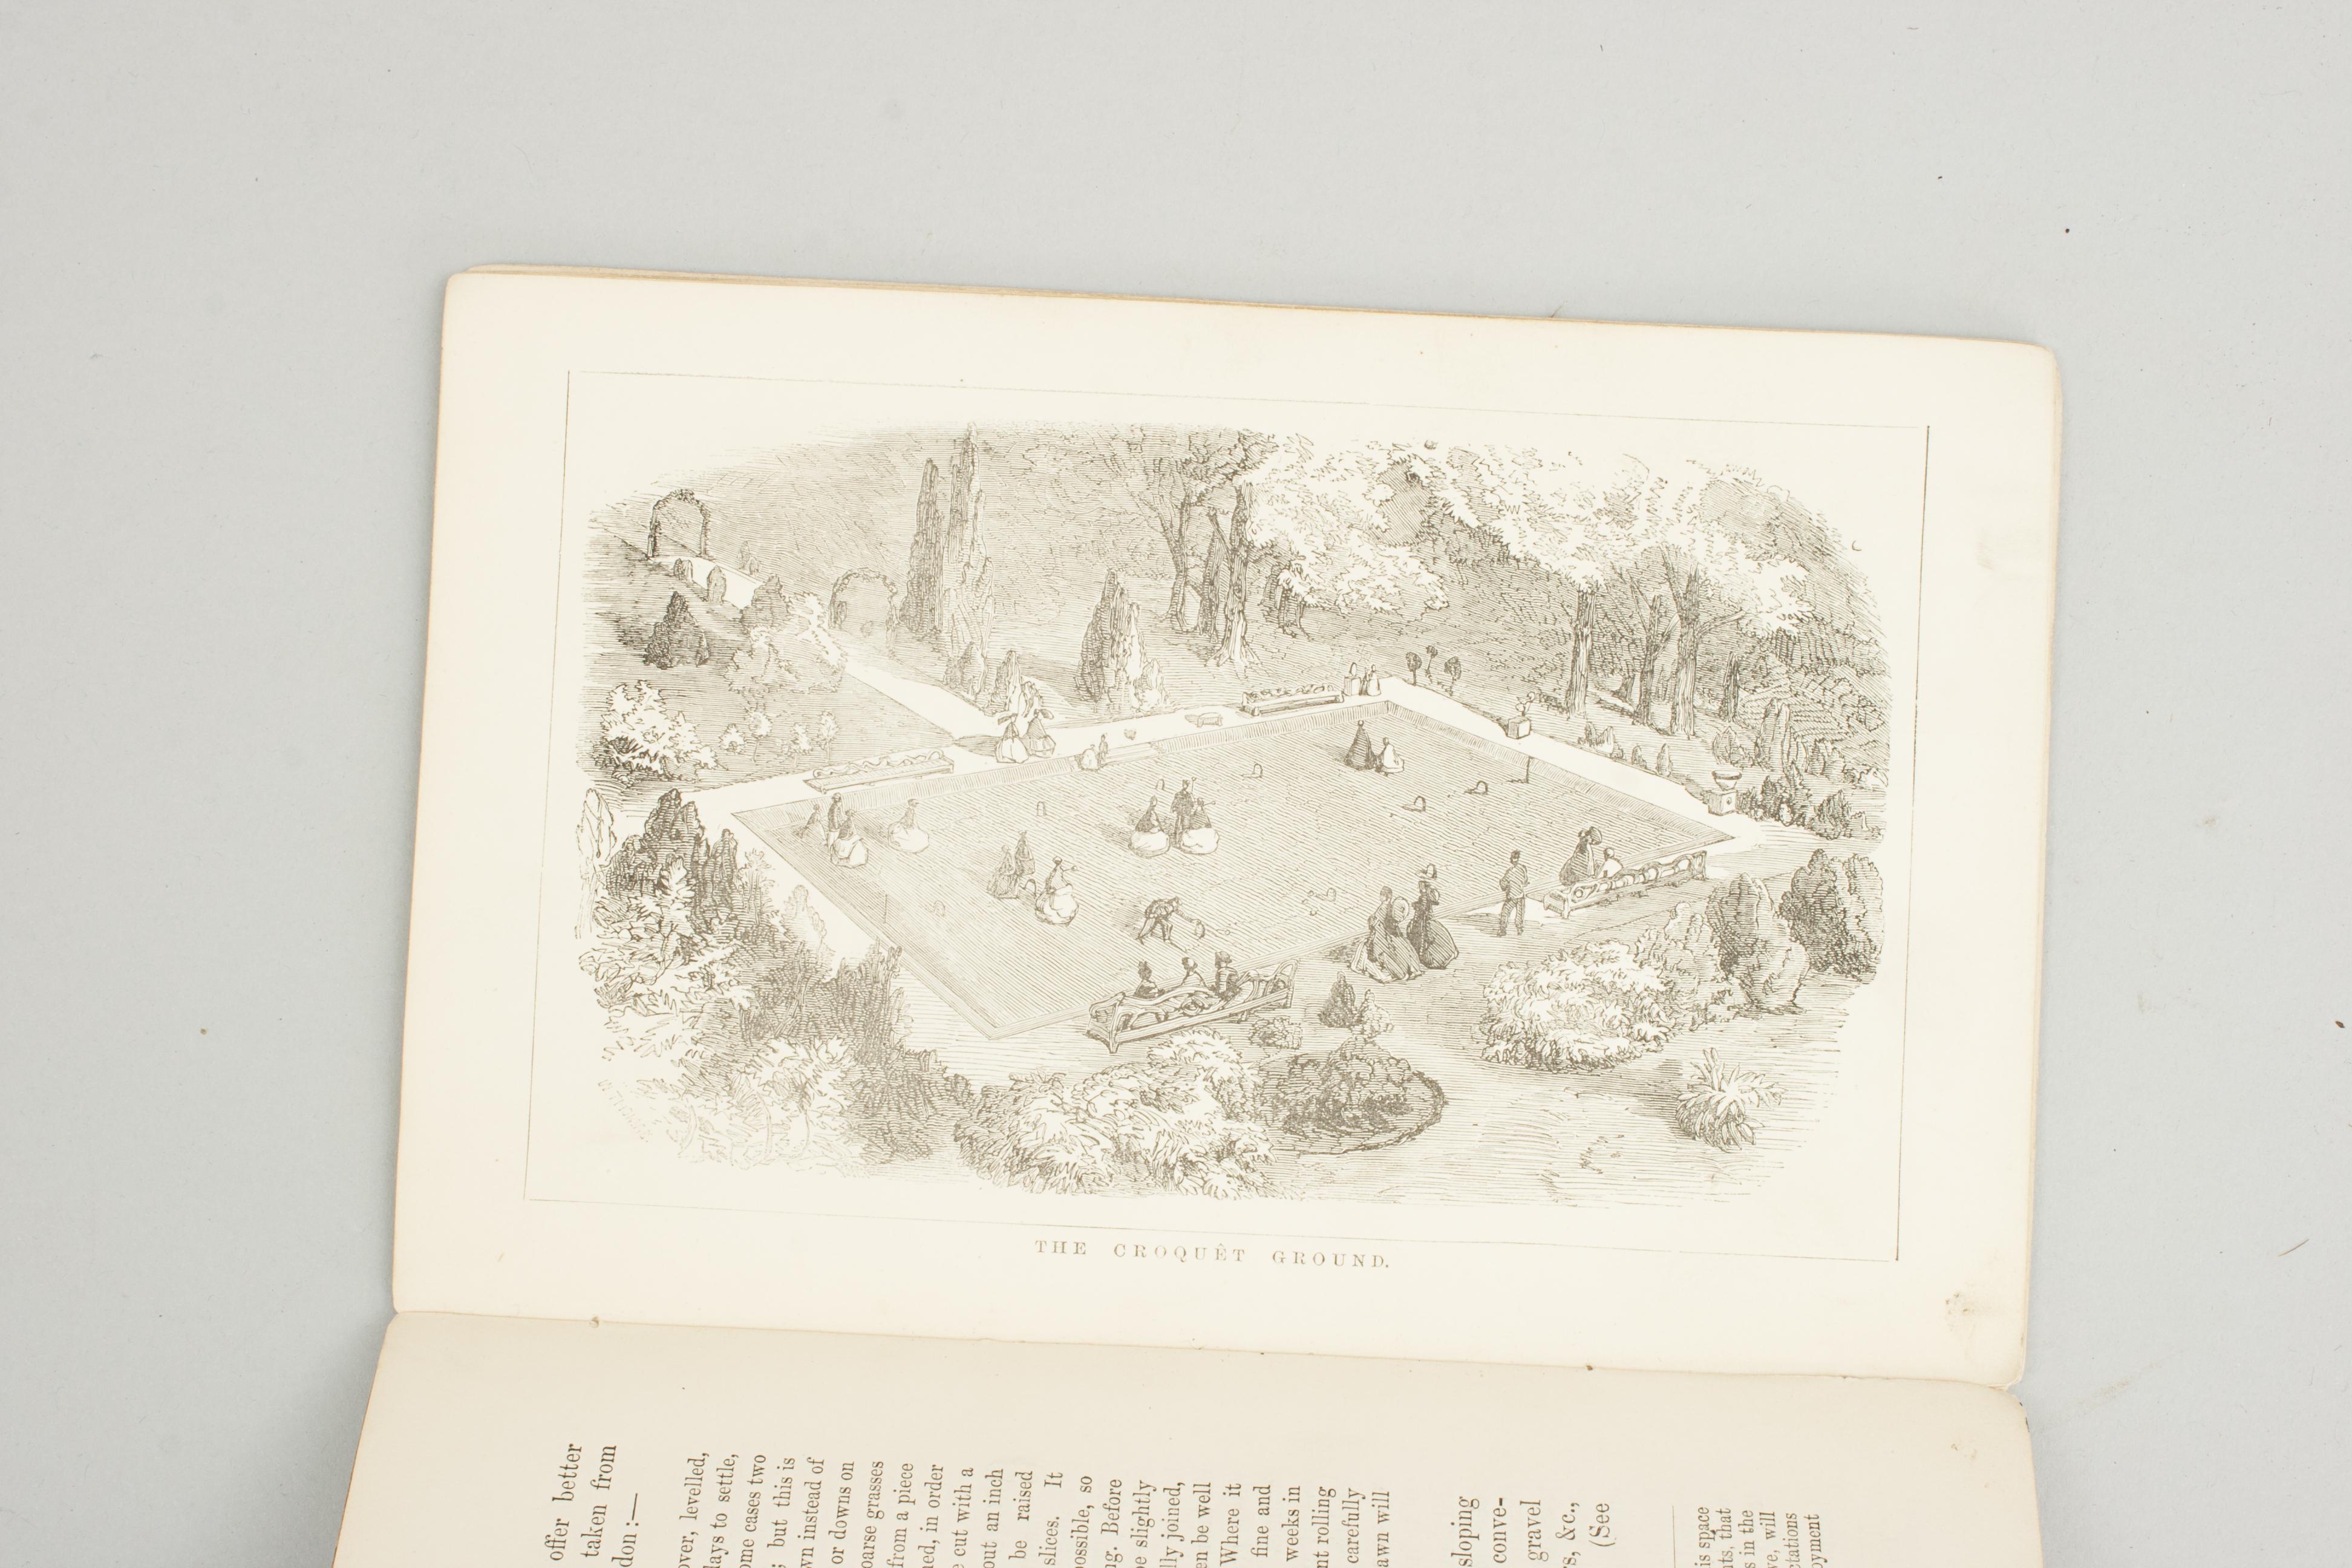 Sporting Art Antique Croquet Rules Book, Croquet by Jacques For Sale